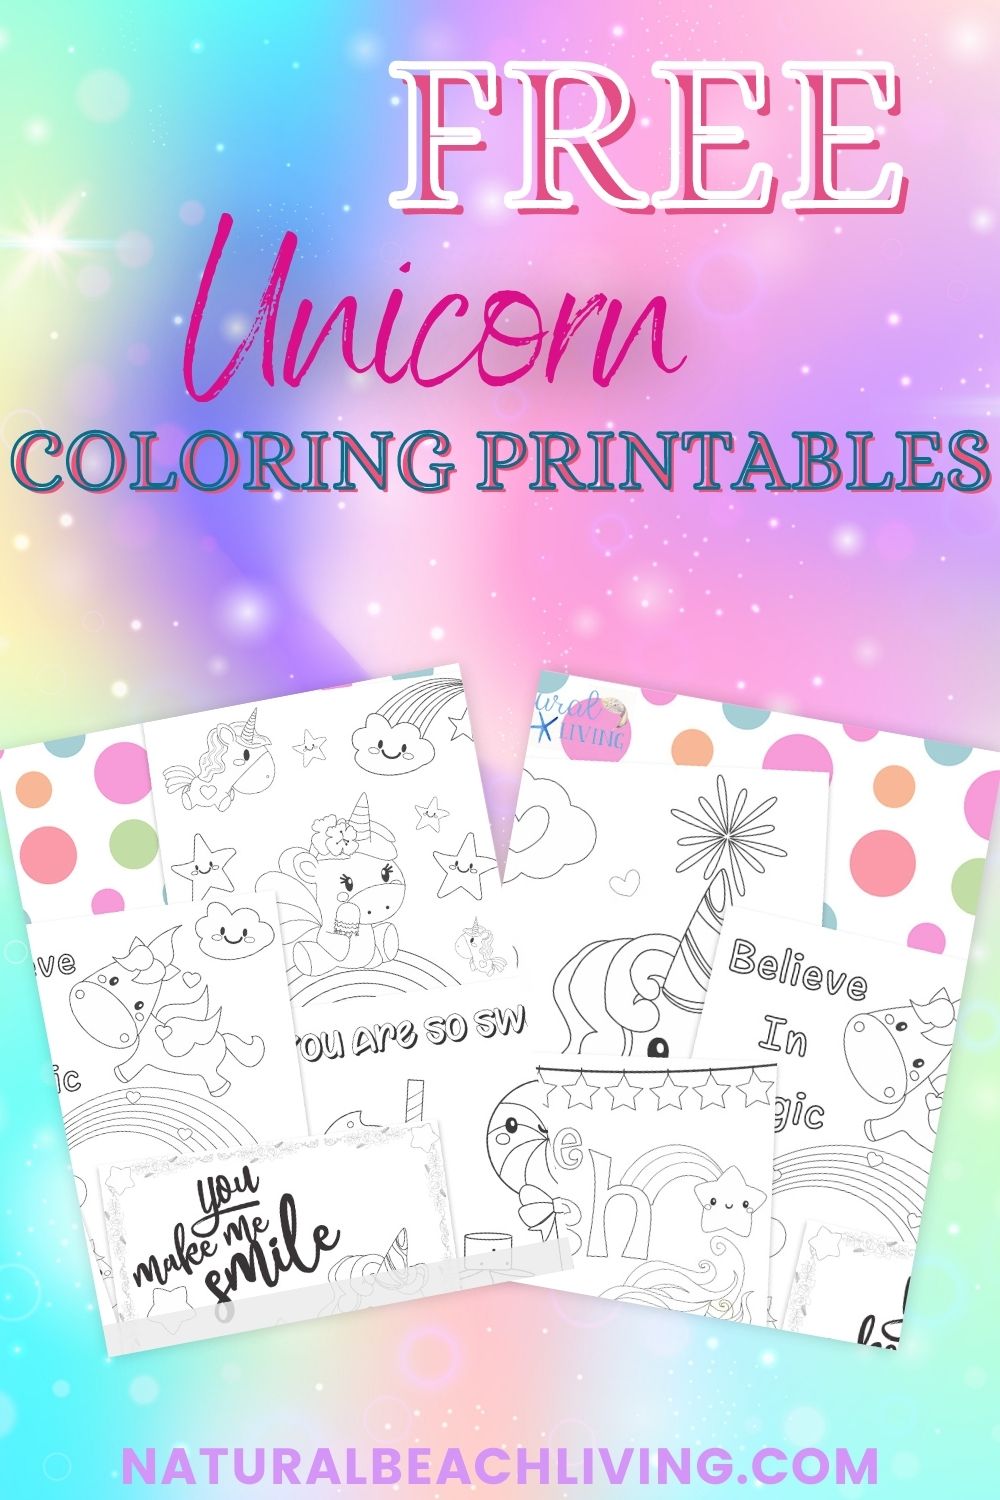 Free Unicorn Coloring Pages, Unicorn Preschool Theme Activities, and Cute Unicorn Printables